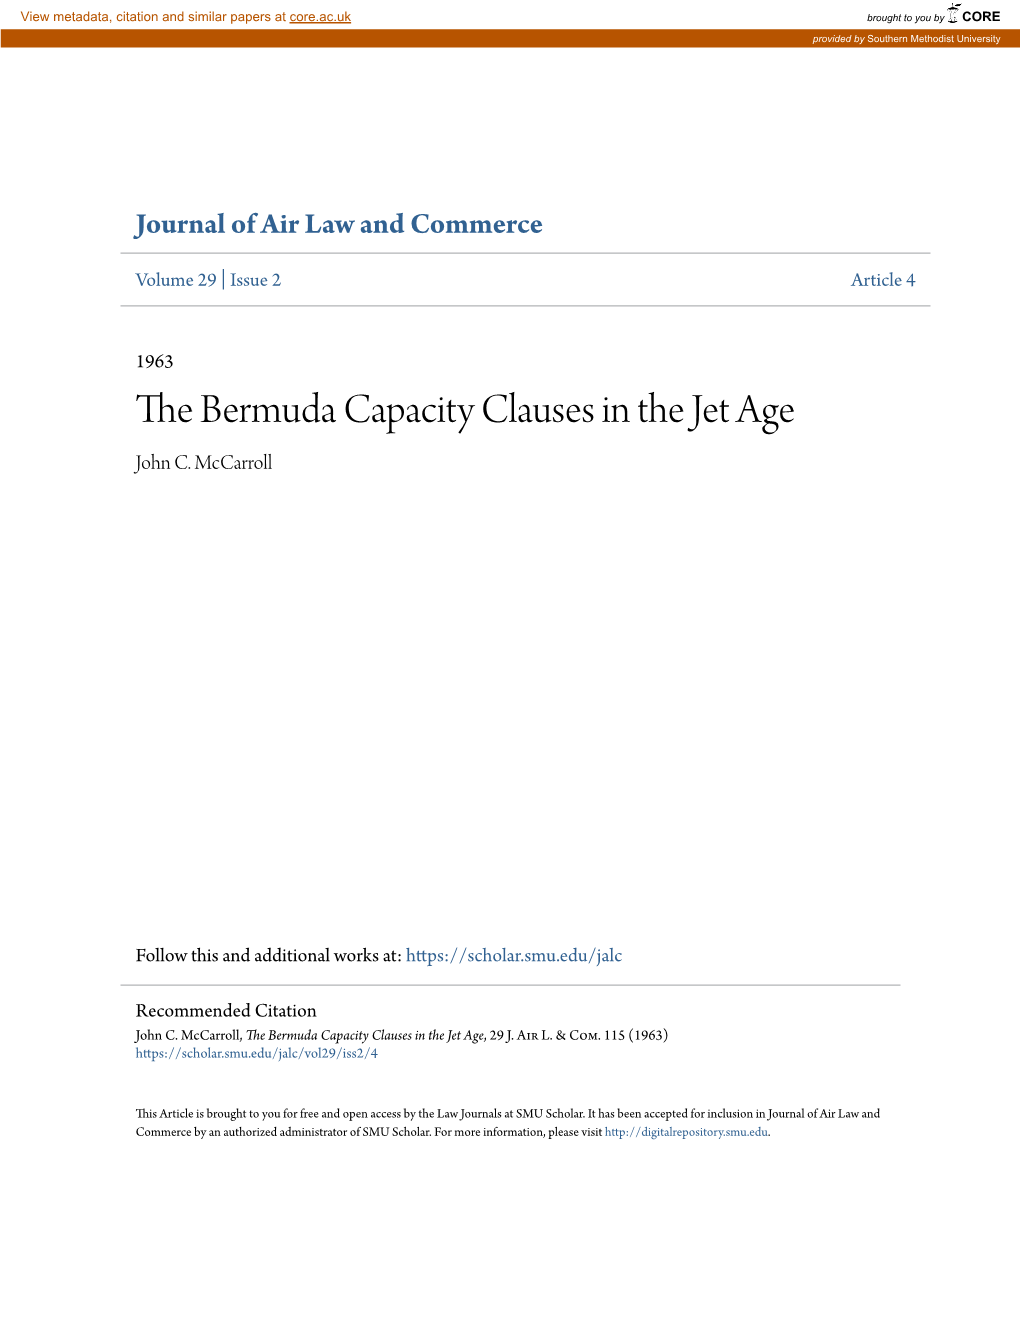 The Bermuda Capacity Clauses in the Jet Age John C